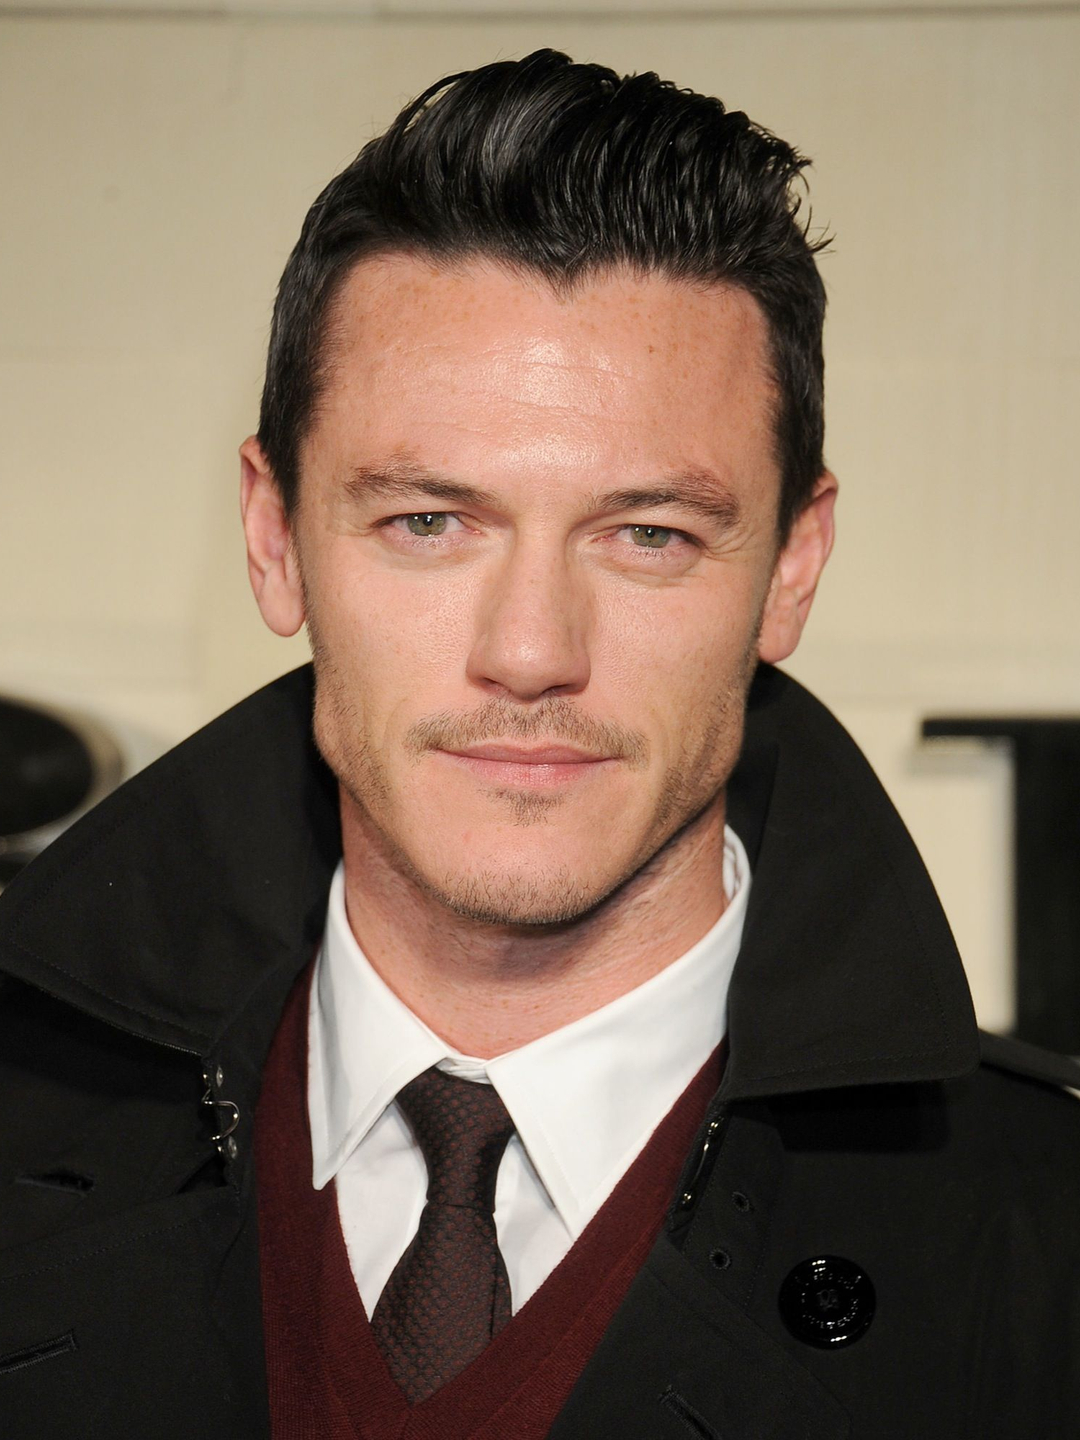 Luke Evans how did he became famous